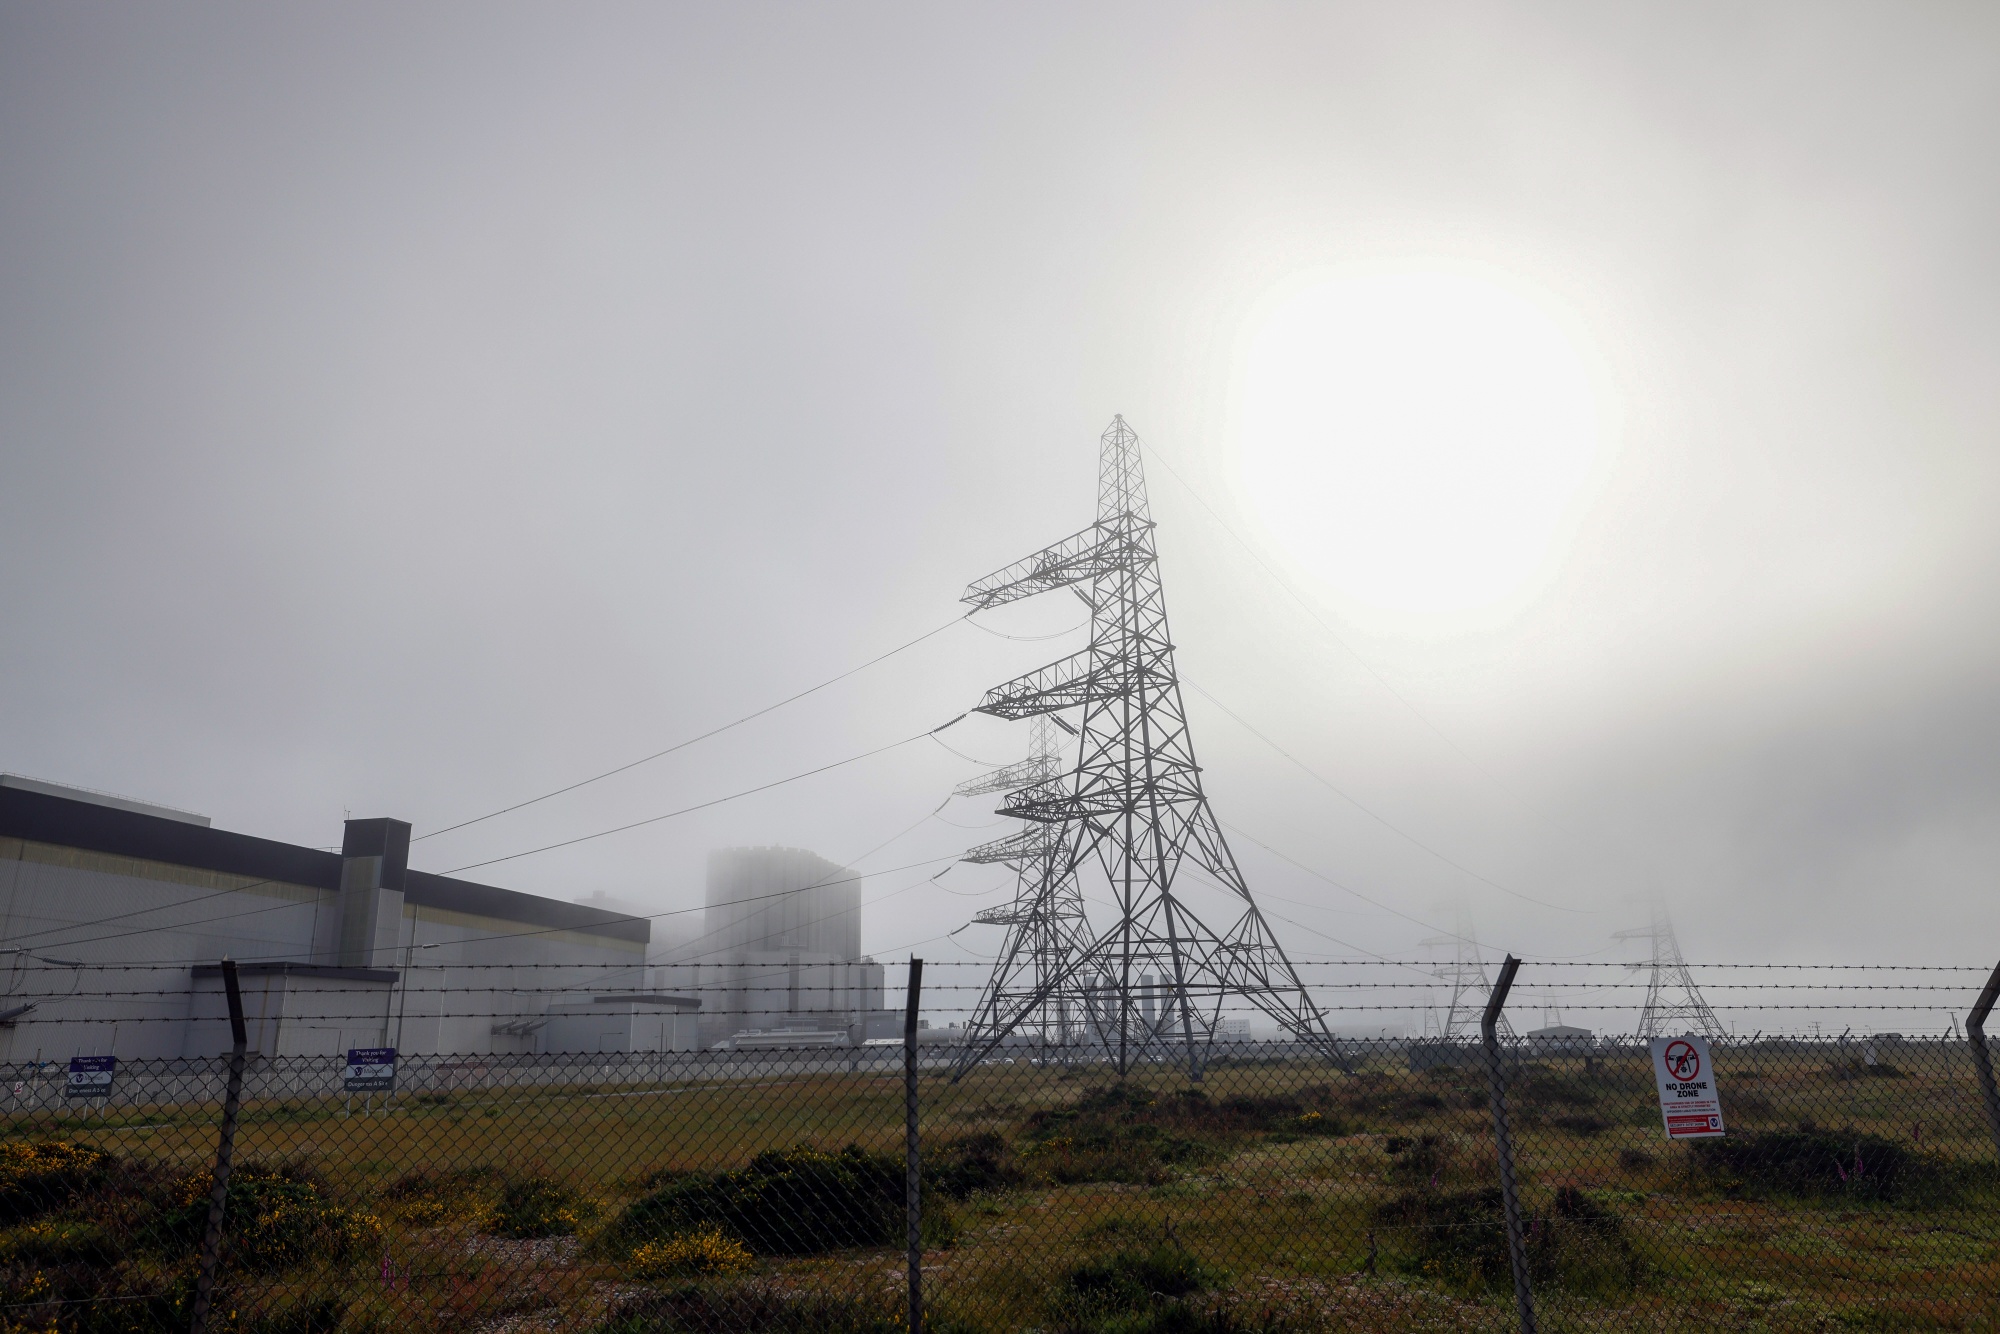 Dungeness B nuclear power plant, operated by Electricite de France SA (EDF), in Dungeness, U.K., on June 10, 2021. Electricite de France SA will consider alternatives for power contracts tied to its Dungeness B nuclear power station in the U.K., which will be permanently decommissioned.